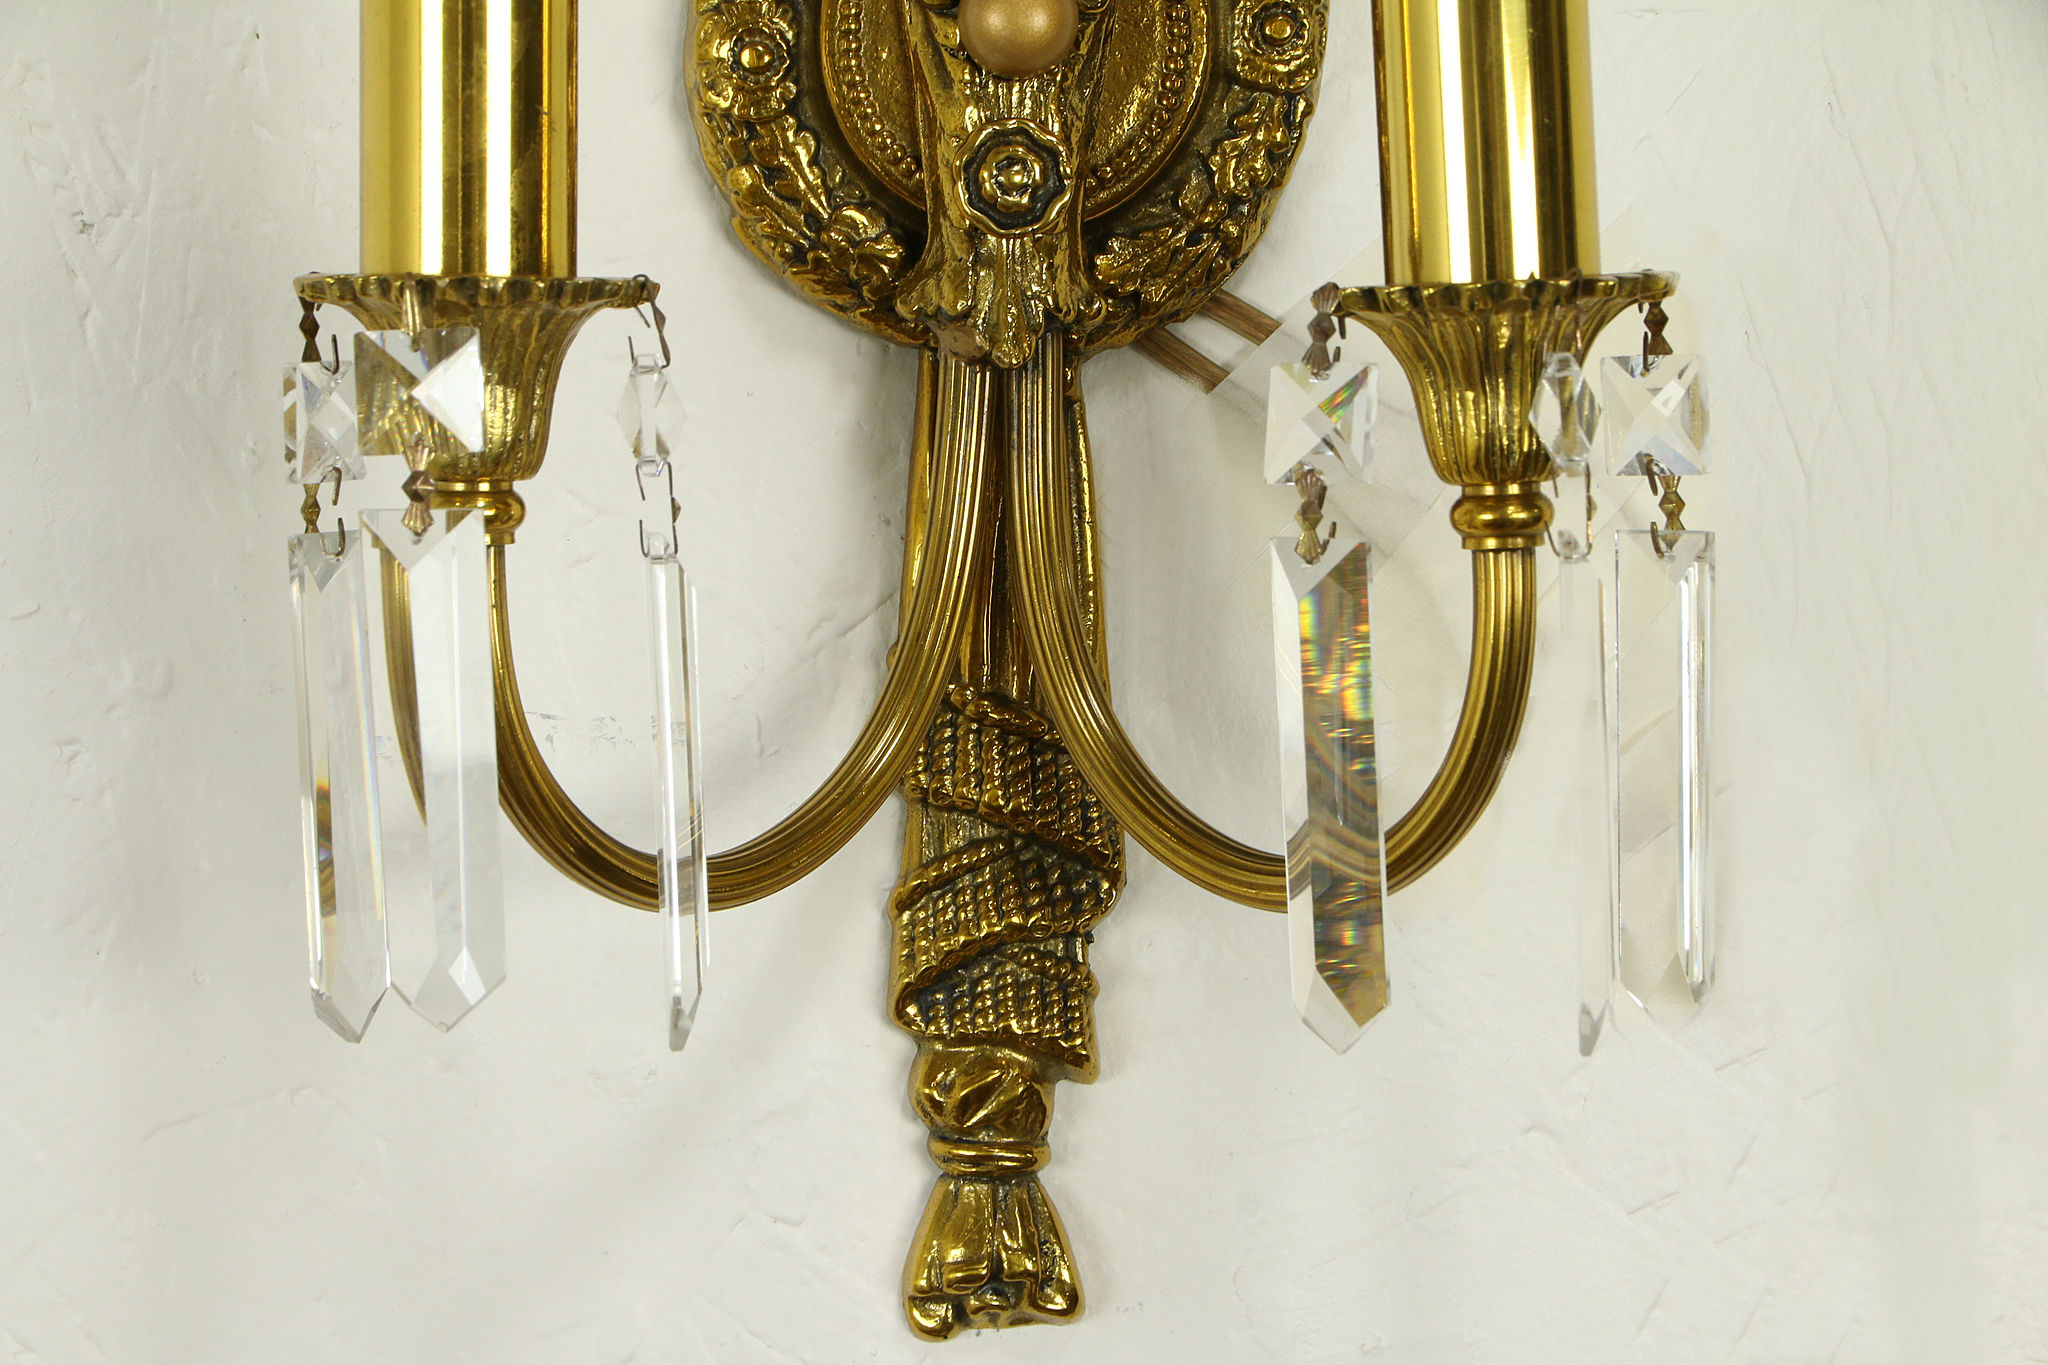 50's Retro Double Wall Sconce With Satin Gold Finish F2942-12 